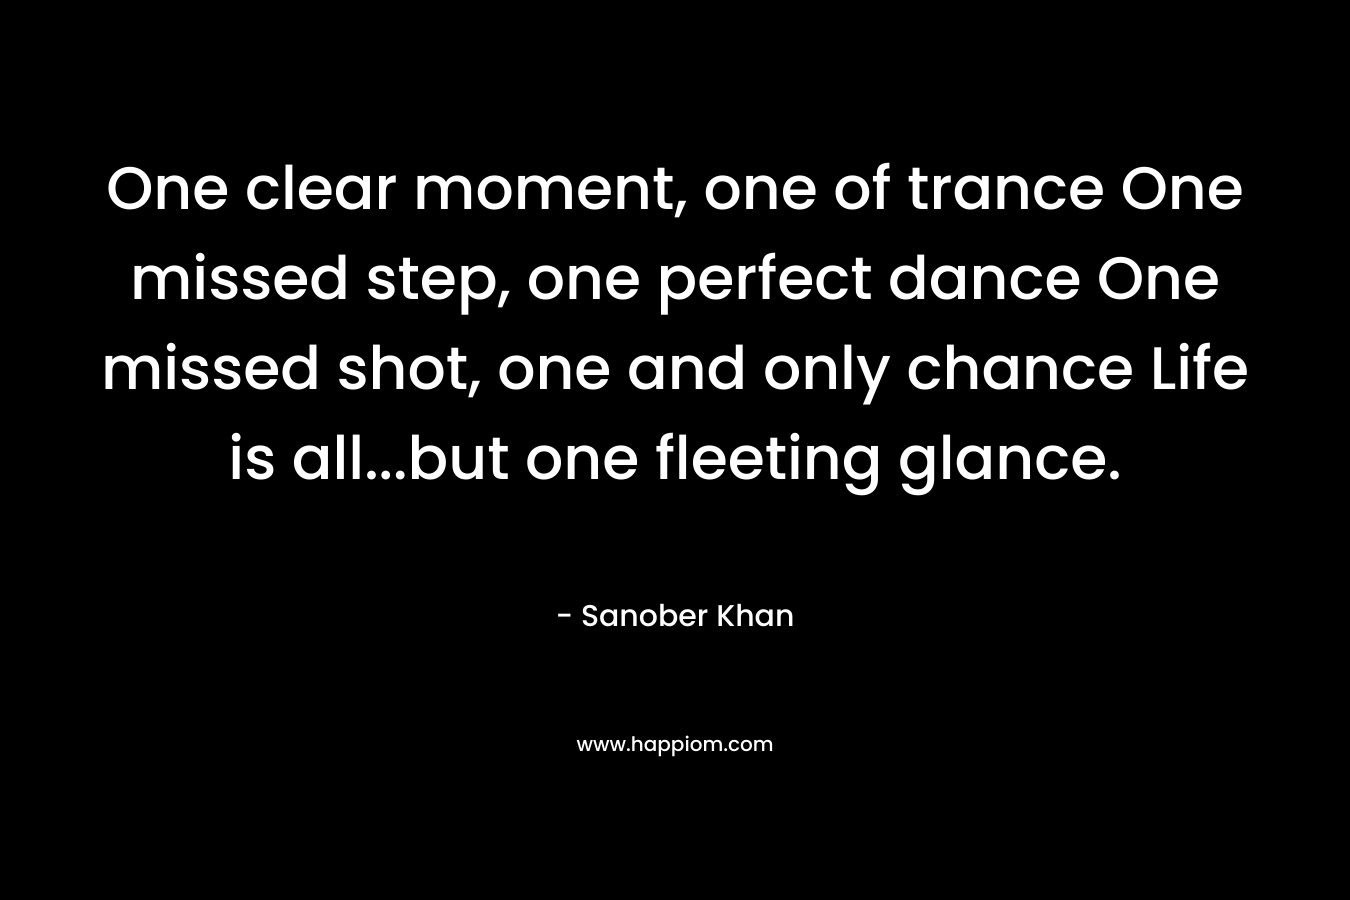 One clear moment, one of trance One missed step, one perfect dance One missed shot, one and only chance Life is all...but one fleeting glance.